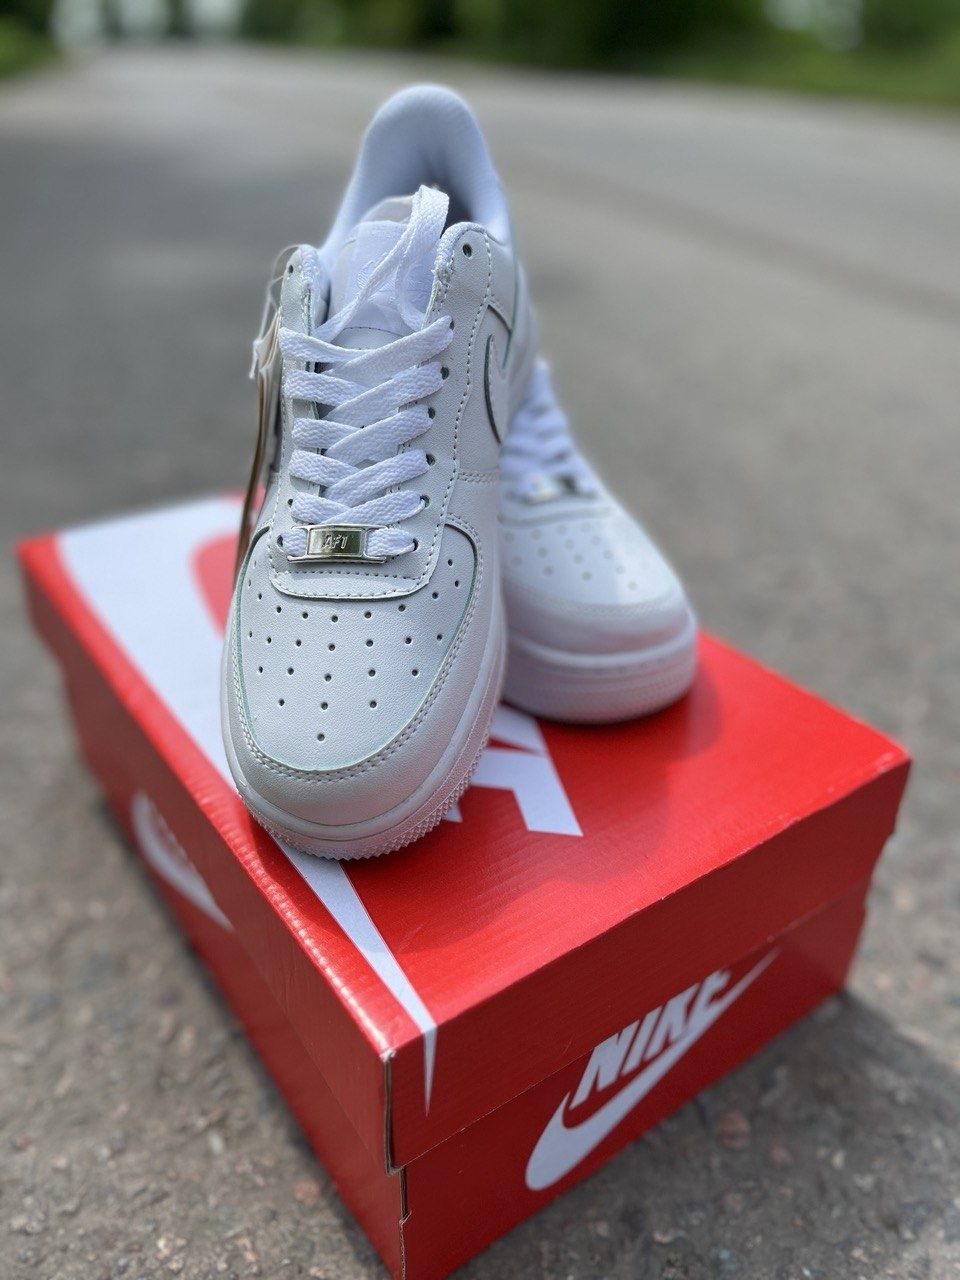 Nike air force 1 low White